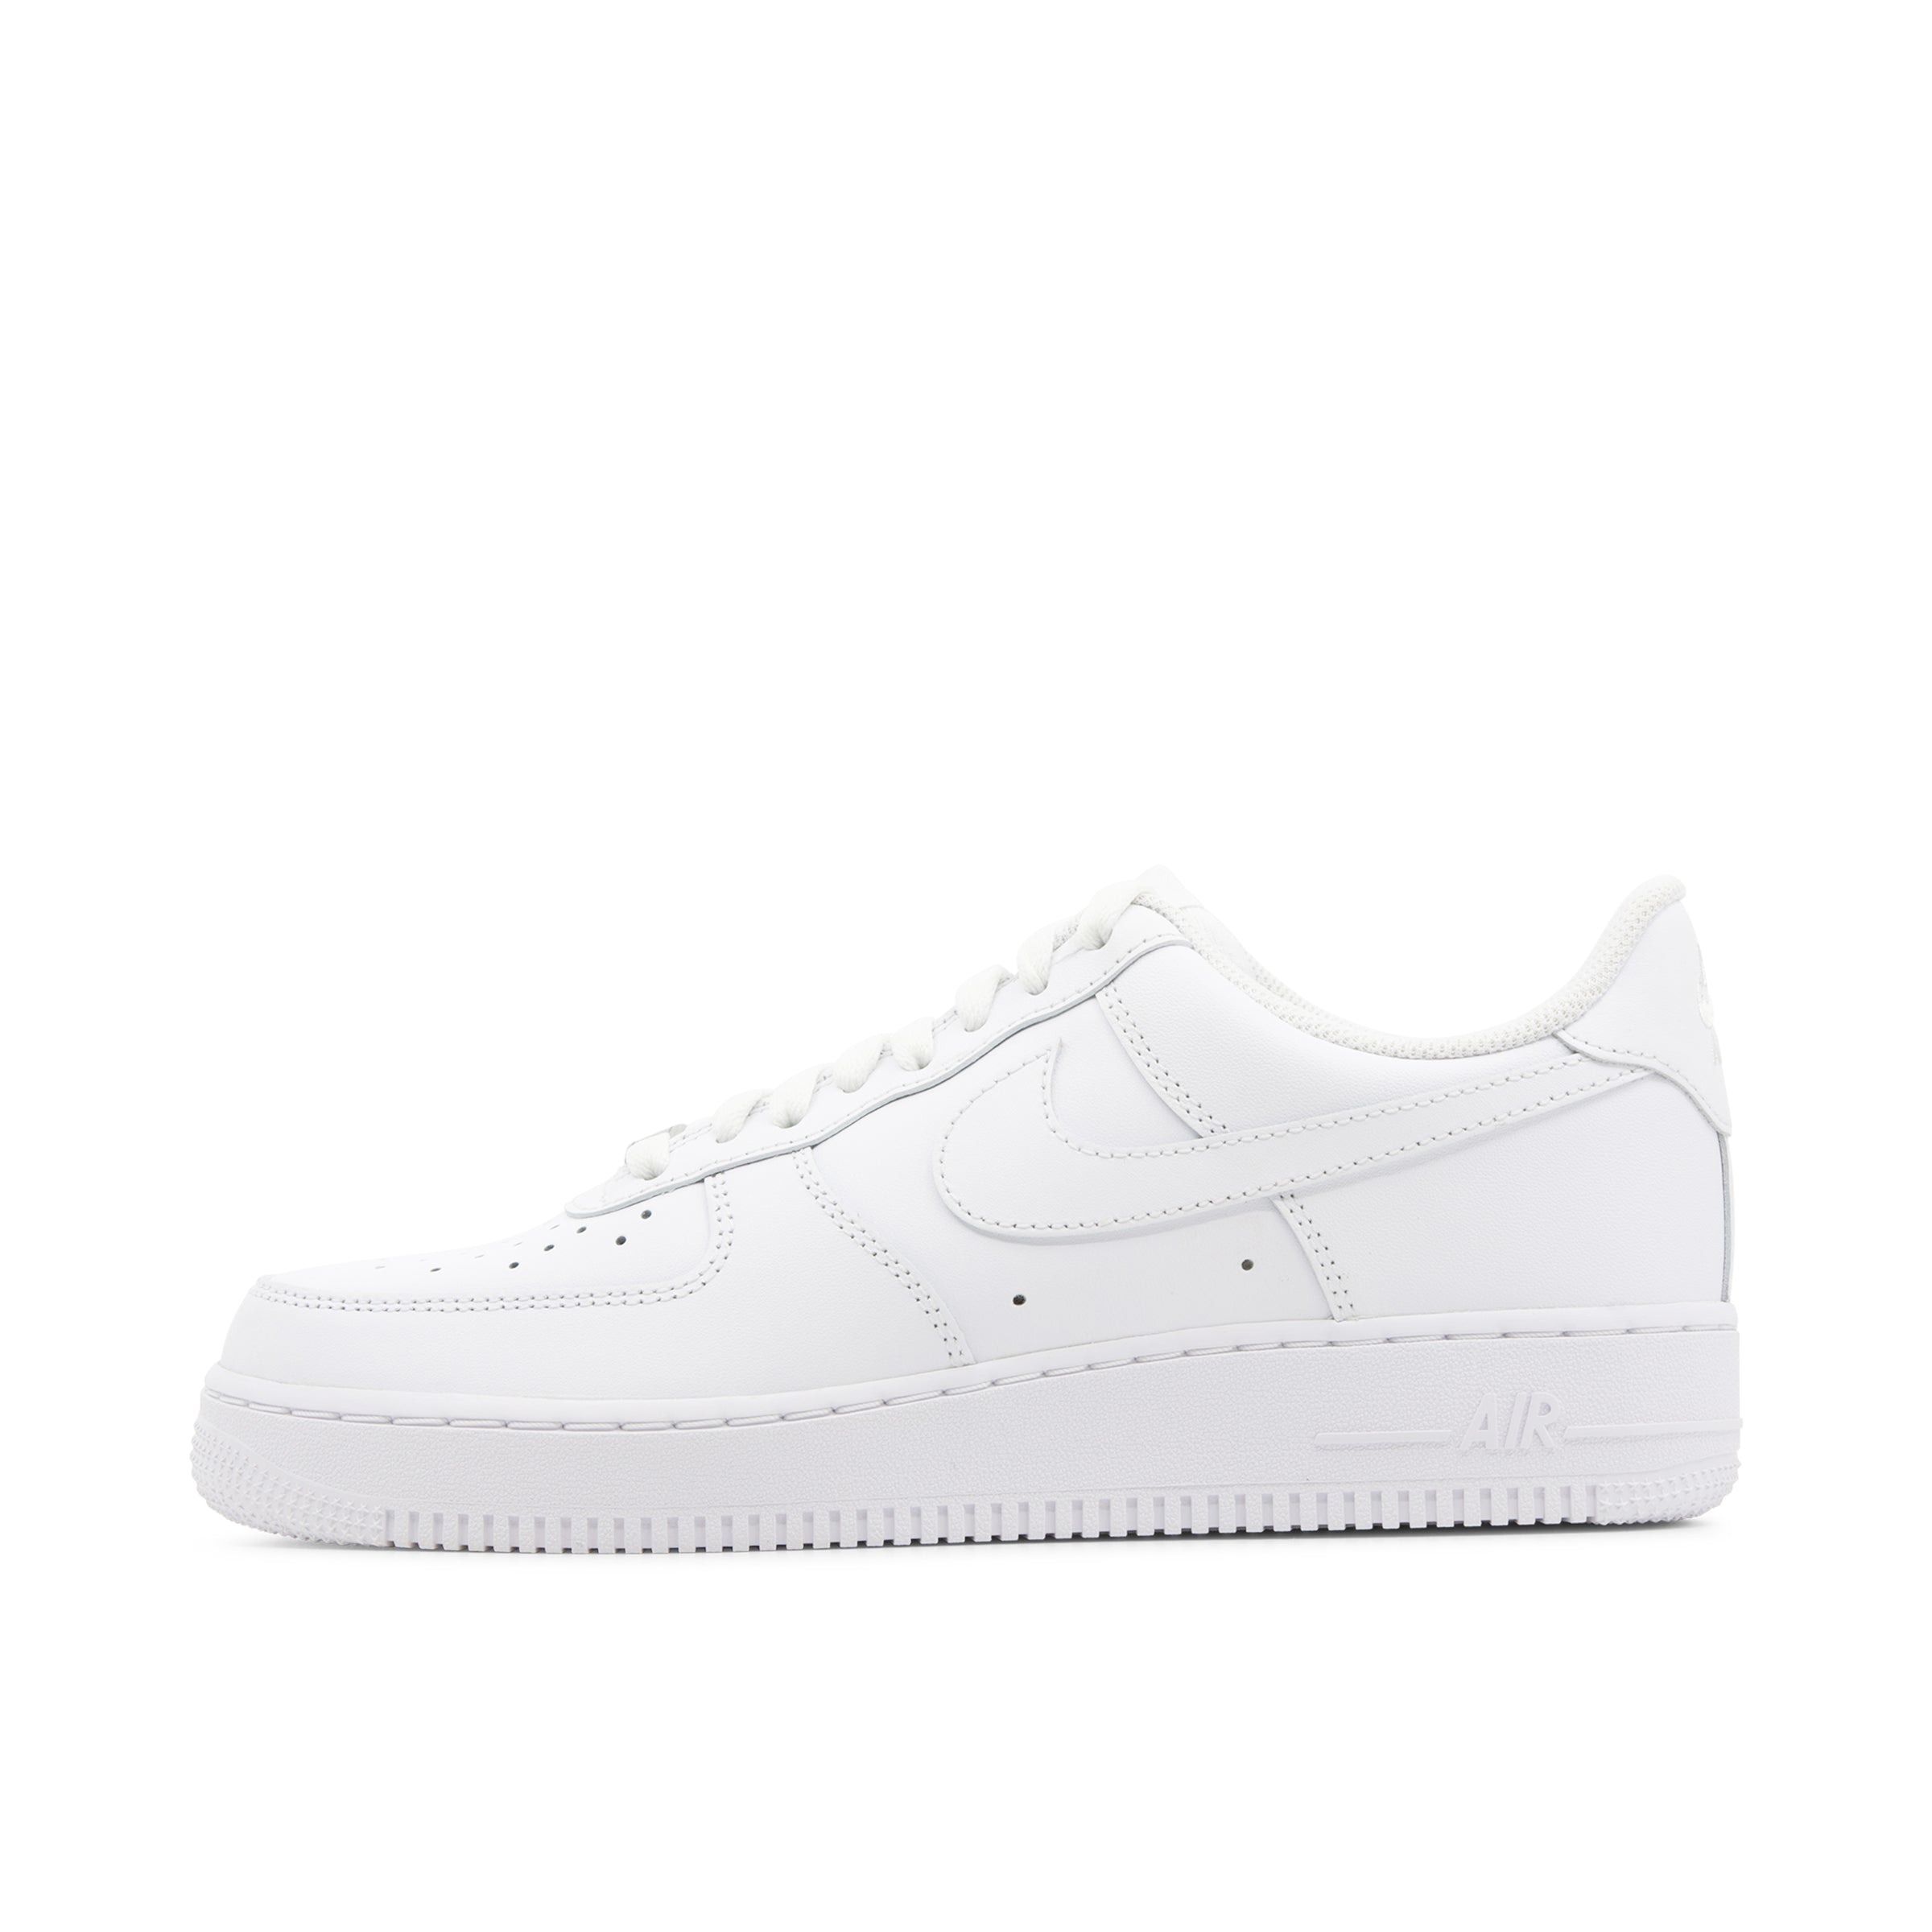 NIKE AIR FORCE 1 LOW WHITE